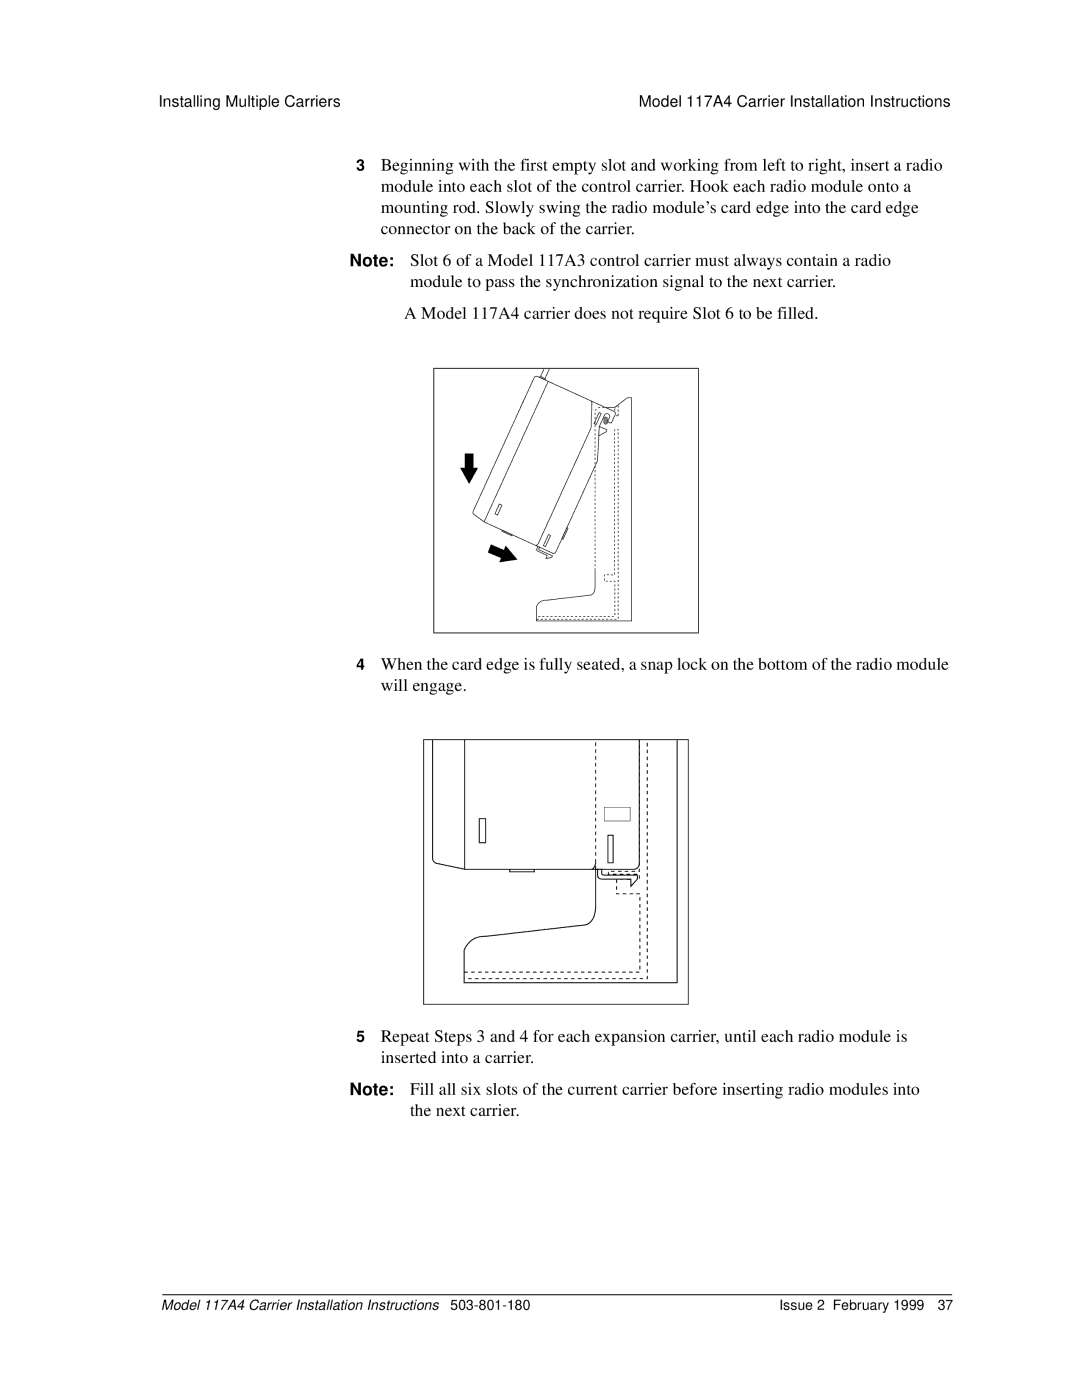 Lucent Technologies 117A4 installation instructions Installing Multiple Carriers 